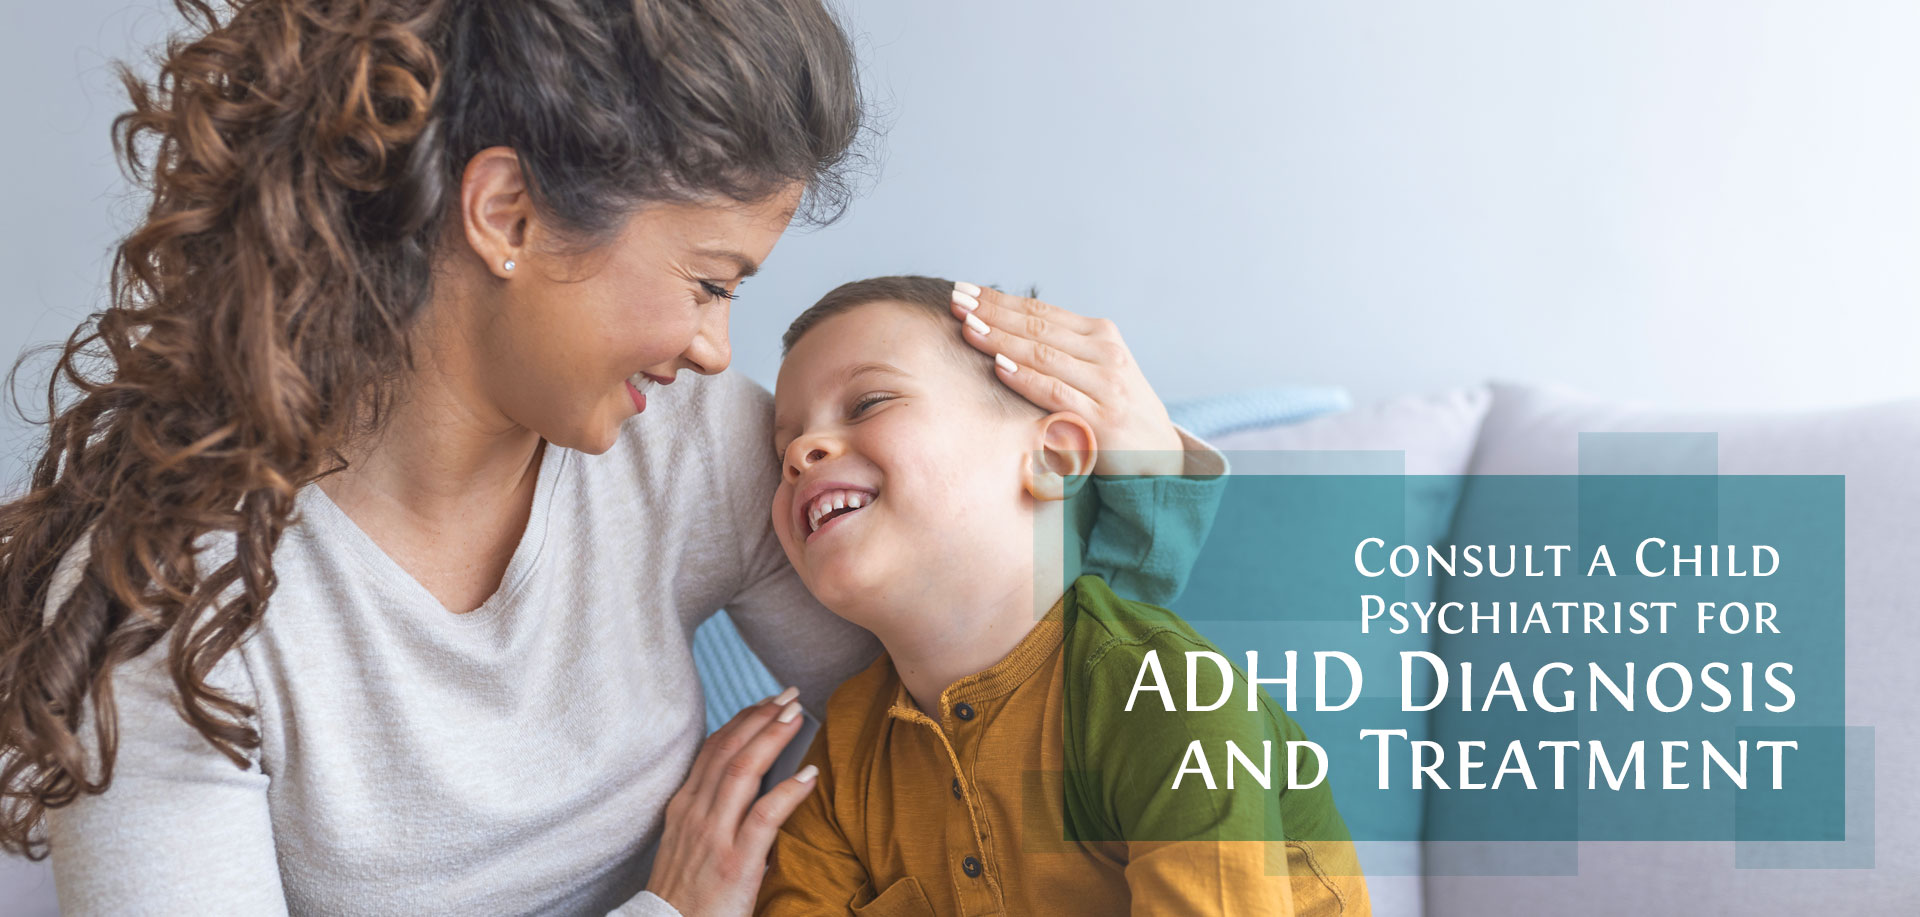 mom and son with text Consult a Child Psychiatrist for ADHD Diagnosis and Treatment